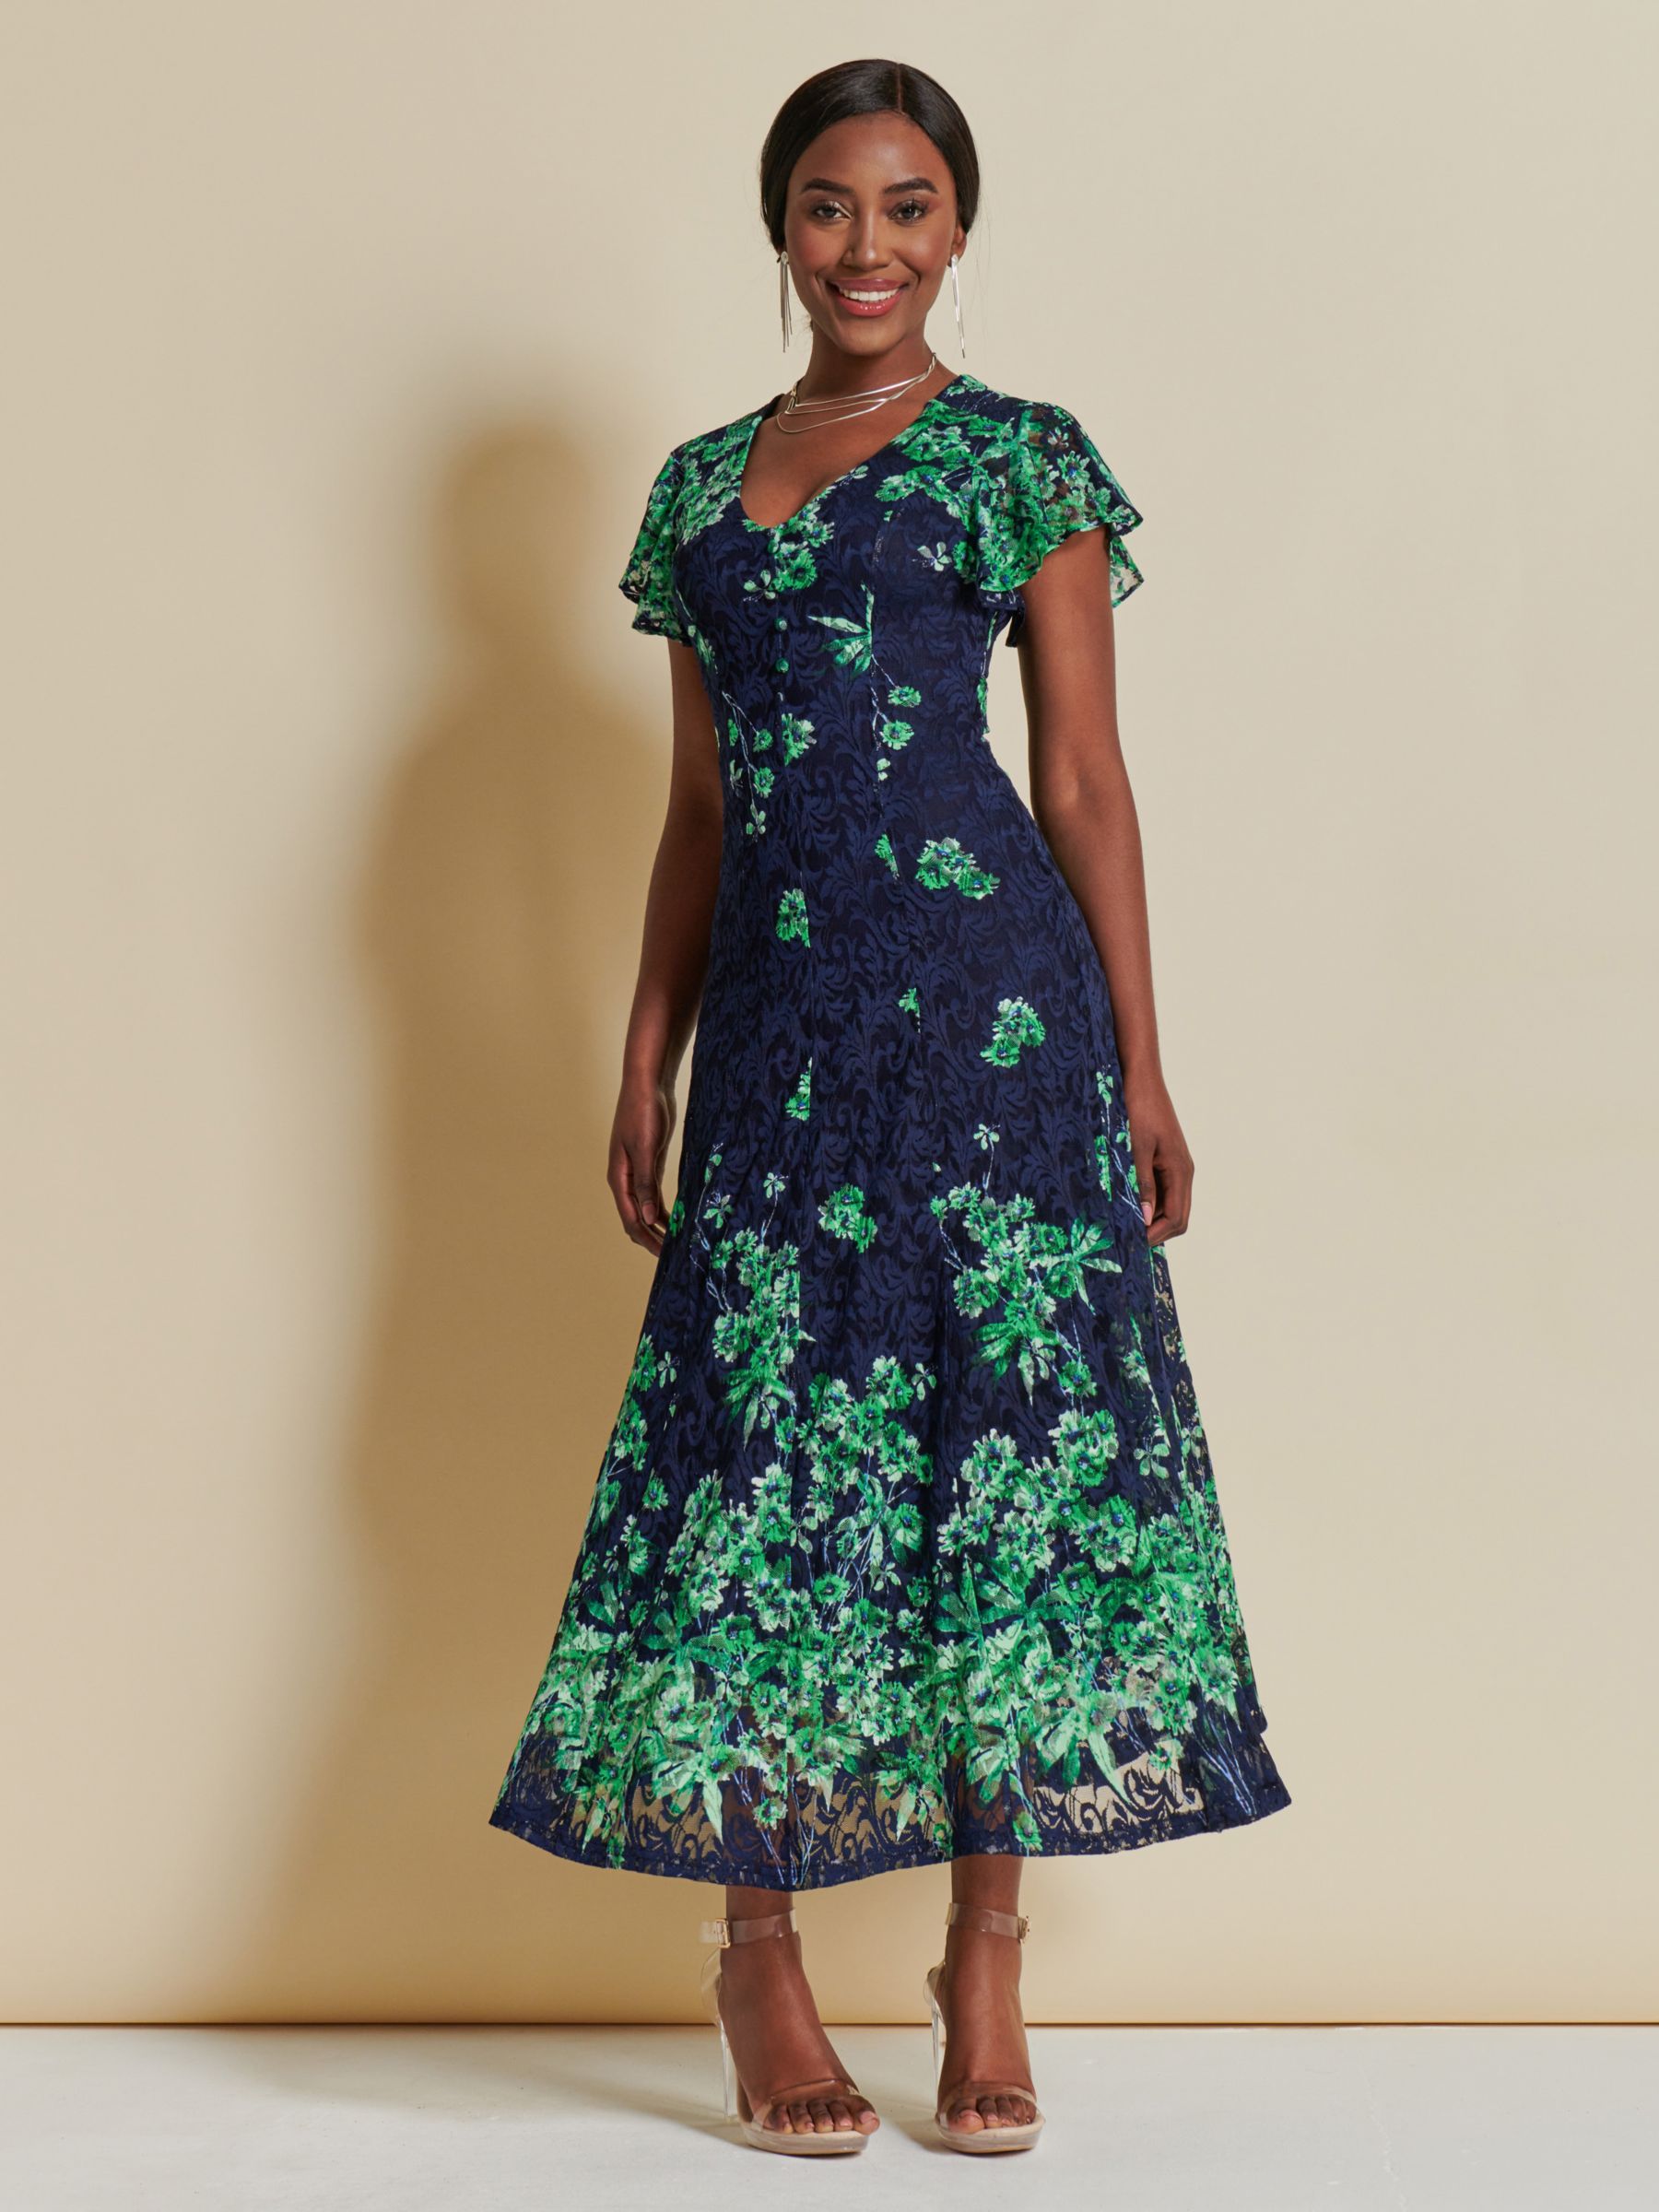 Buy Jolie Moi Floral Lace Fit & Flare Maxi Dress, Green Online at johnlewis.com